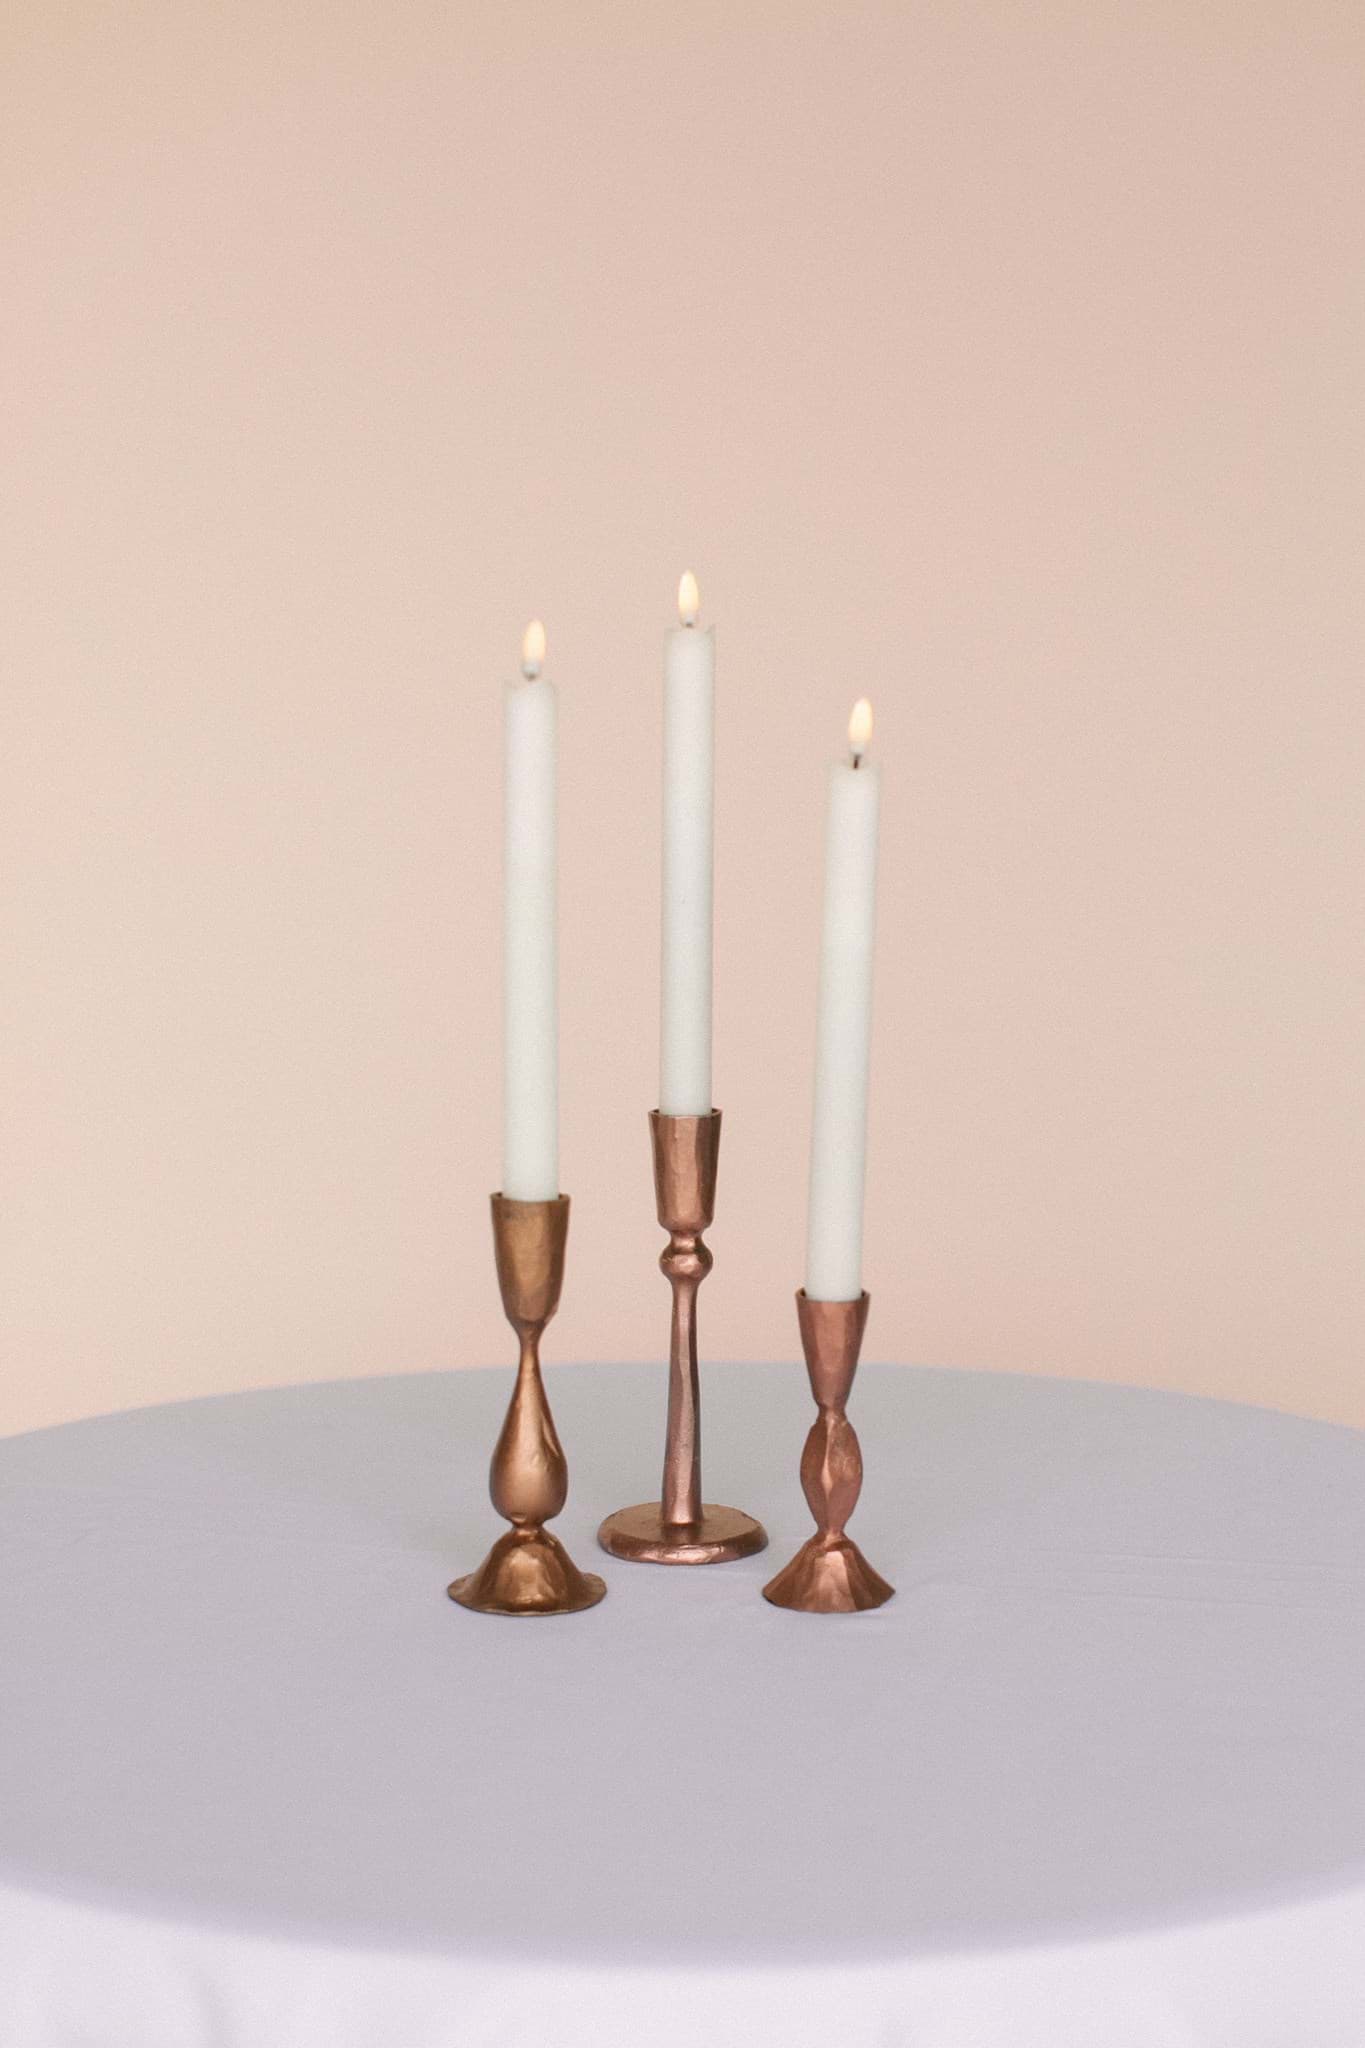 Picture of Antique Copper Candlesticks Set of 3